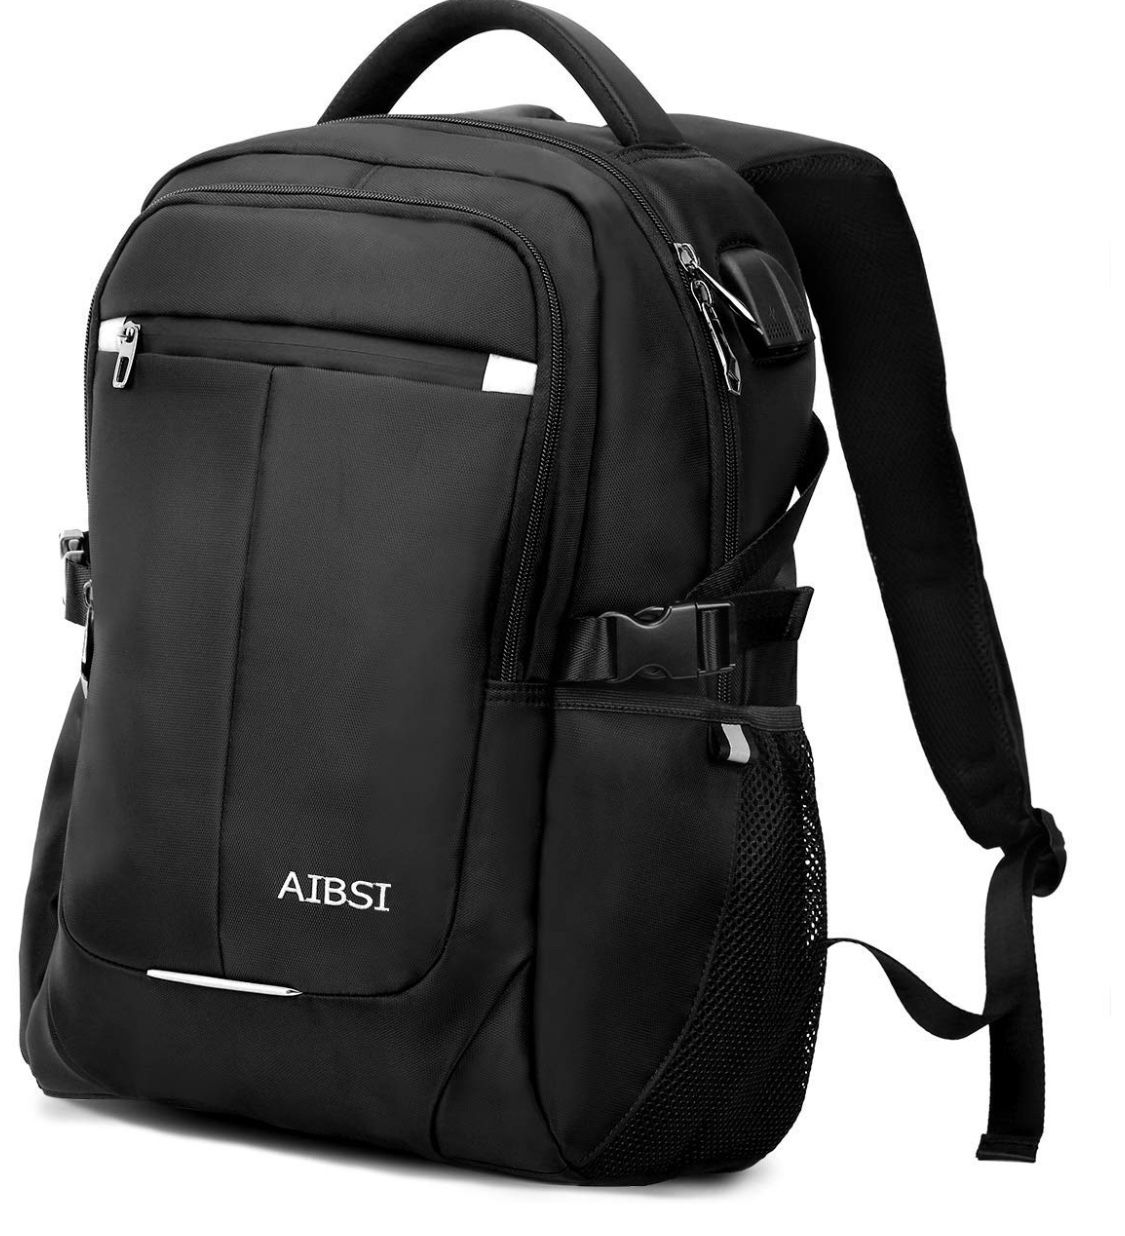 Laptop Backpack, AIBSI Anti Theft Business Backpack for Women & Men, Slim Durable Travel Computer Bag, Waterproof College School Bookbag with USB Cha